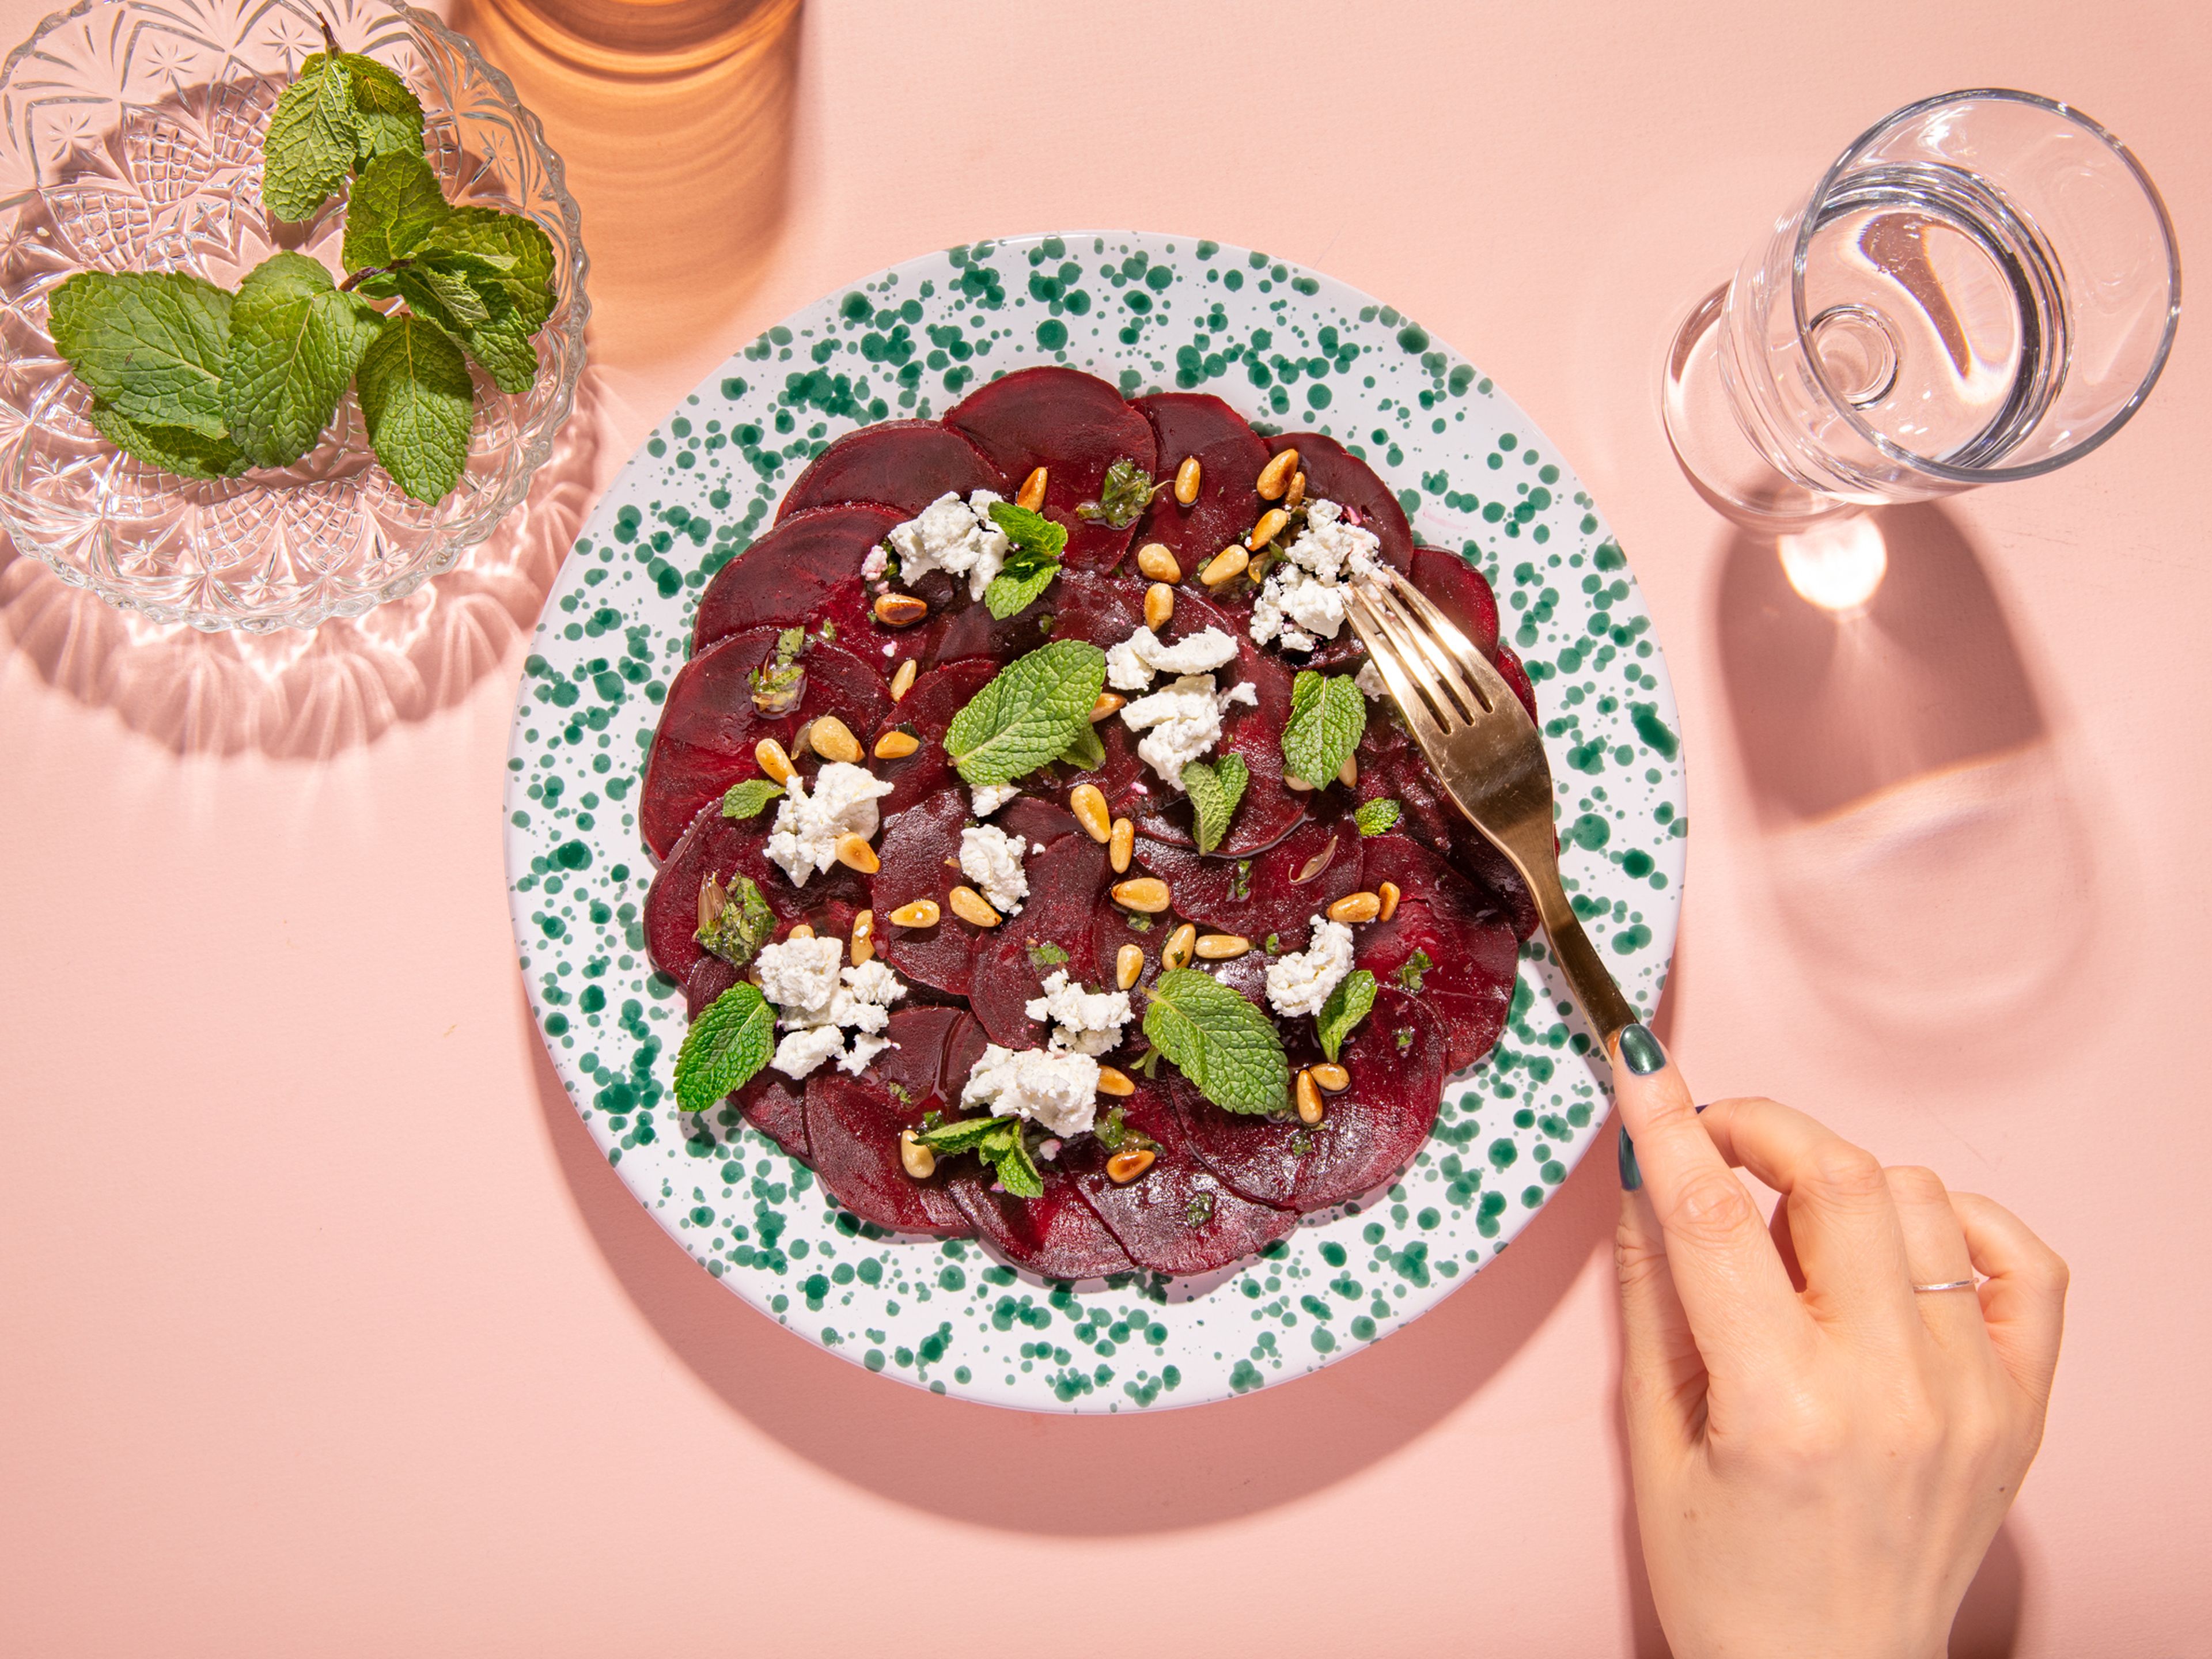 Beet salad with citrusy dressing